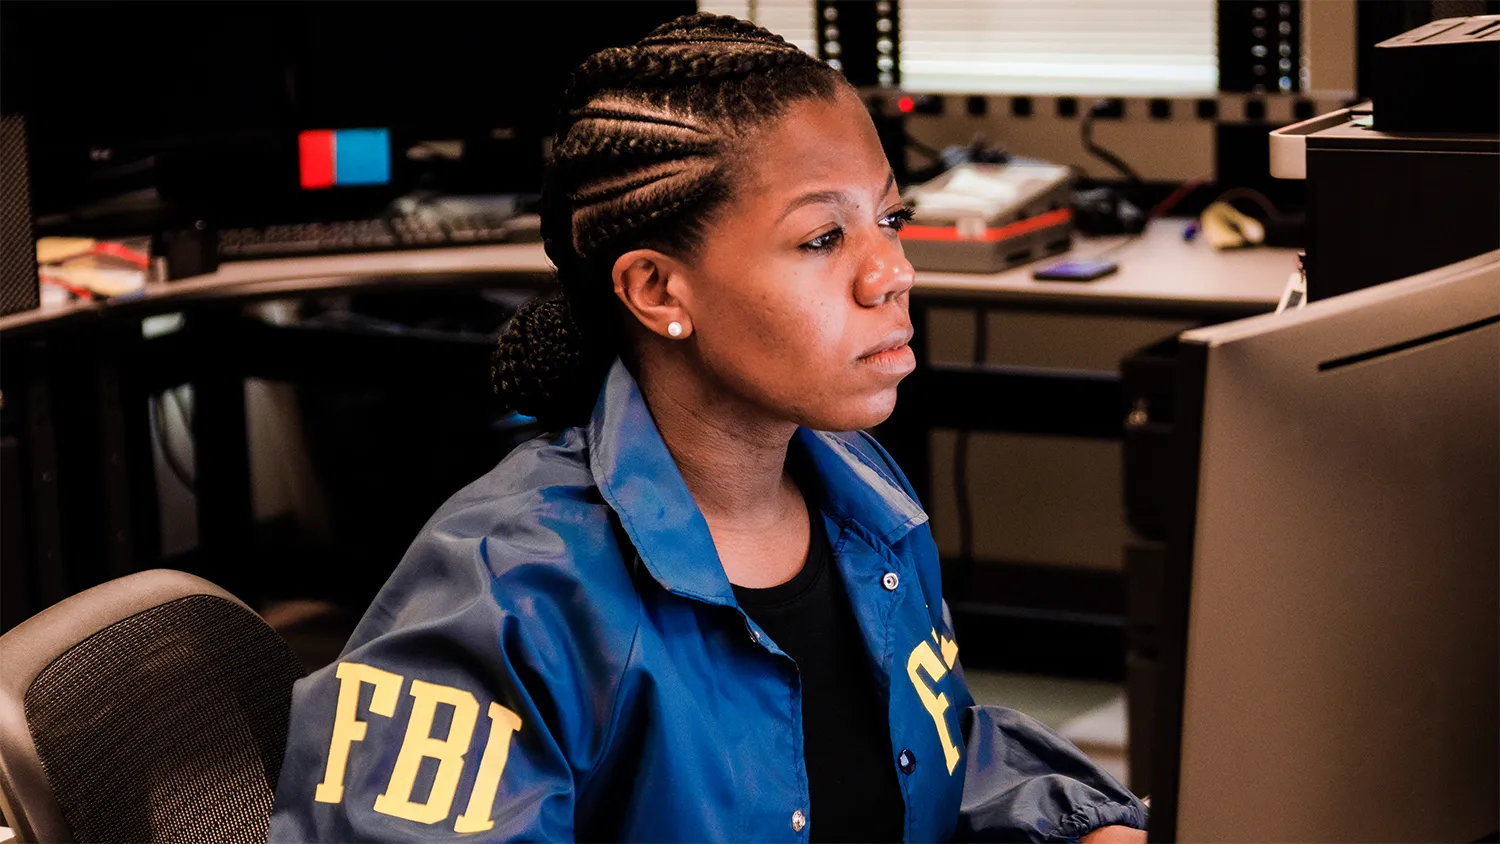 Woman in FBI jacket working at computer